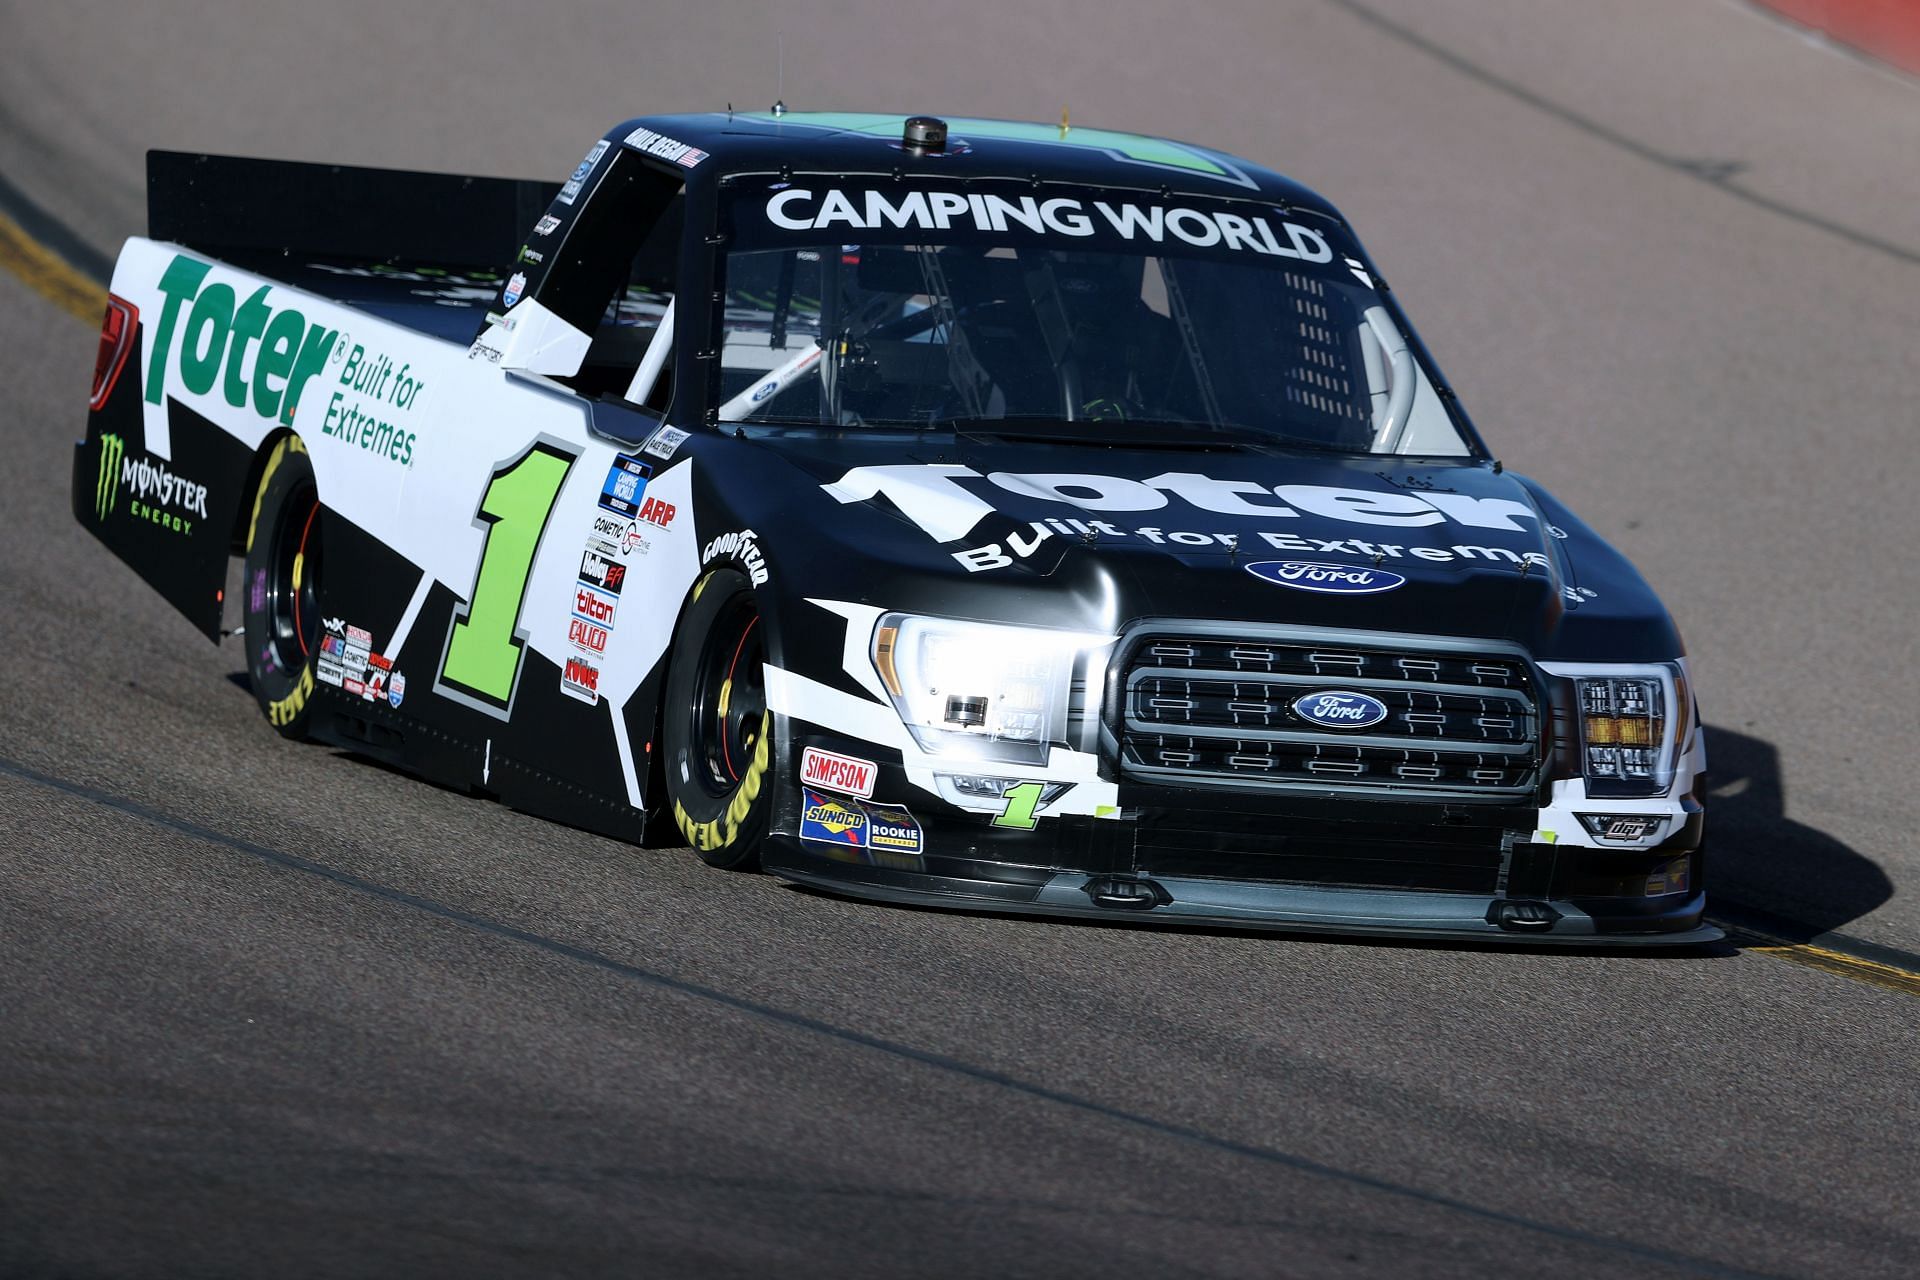 Hailie Deegan in the #1 Toter Ford F-150